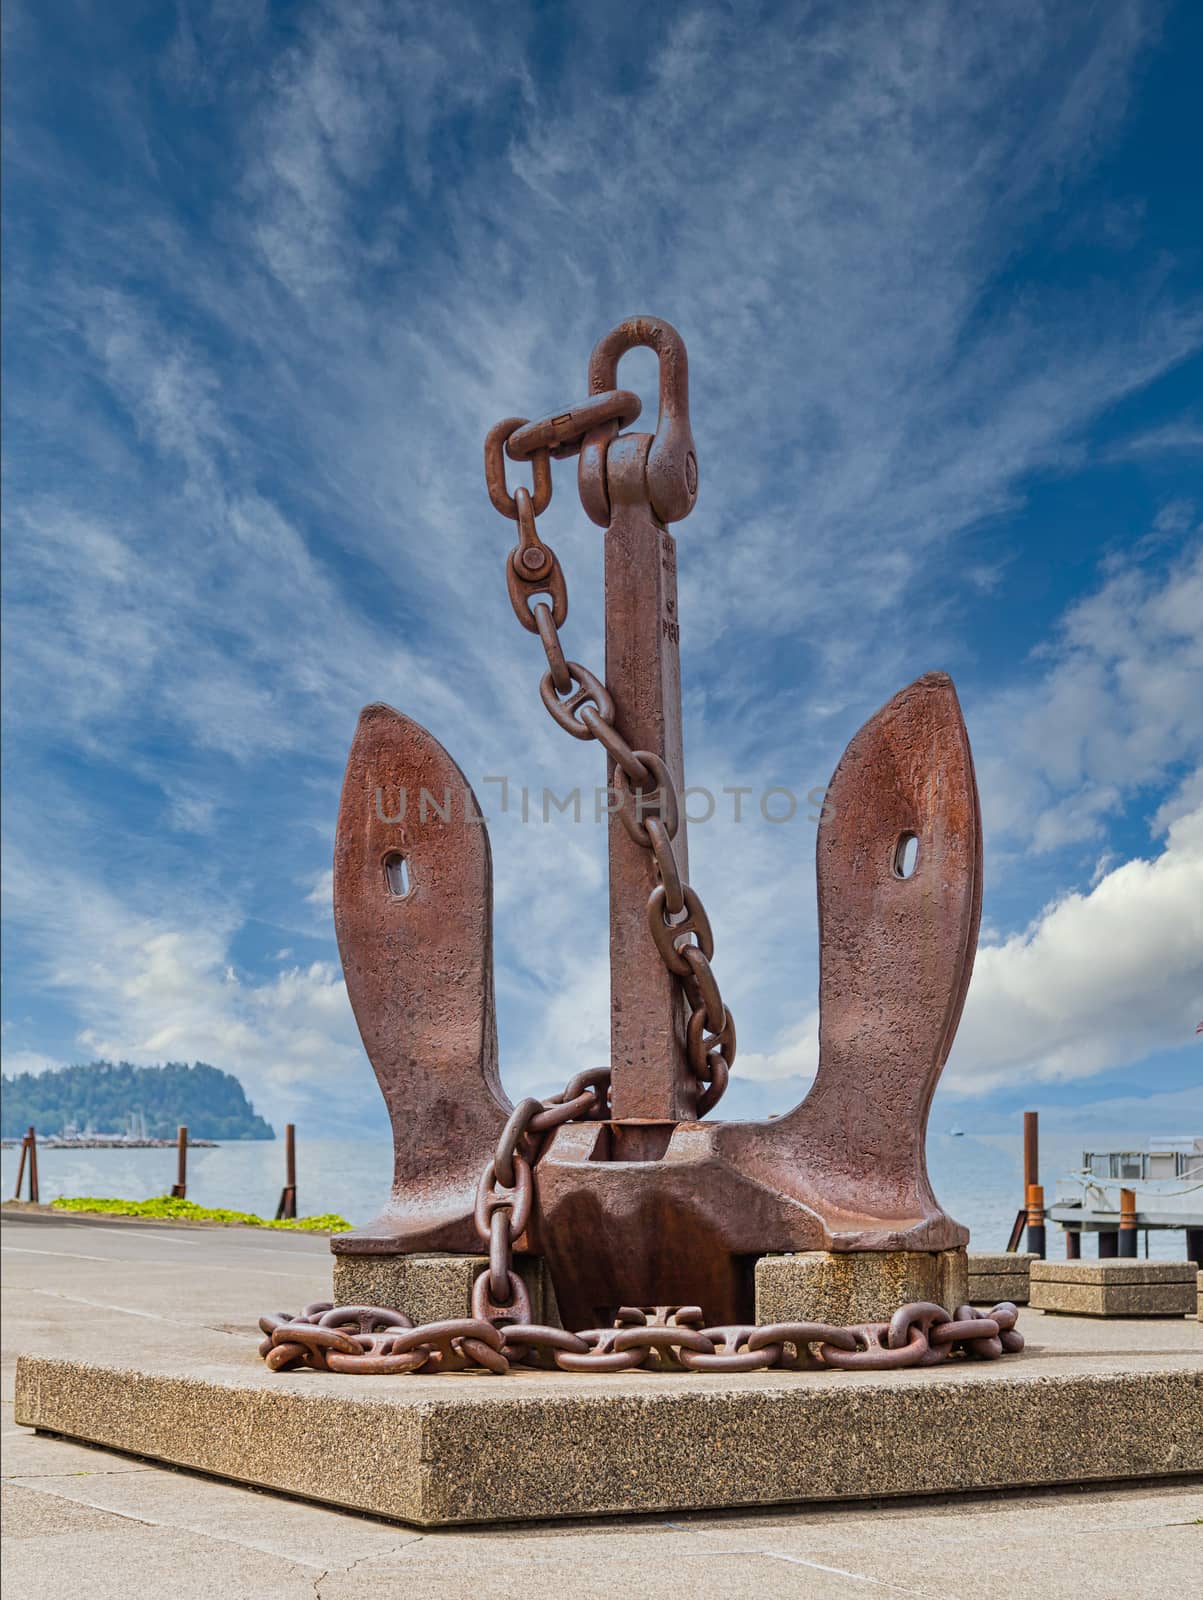 Massive Rusty Anchor and Chain by dbvirago